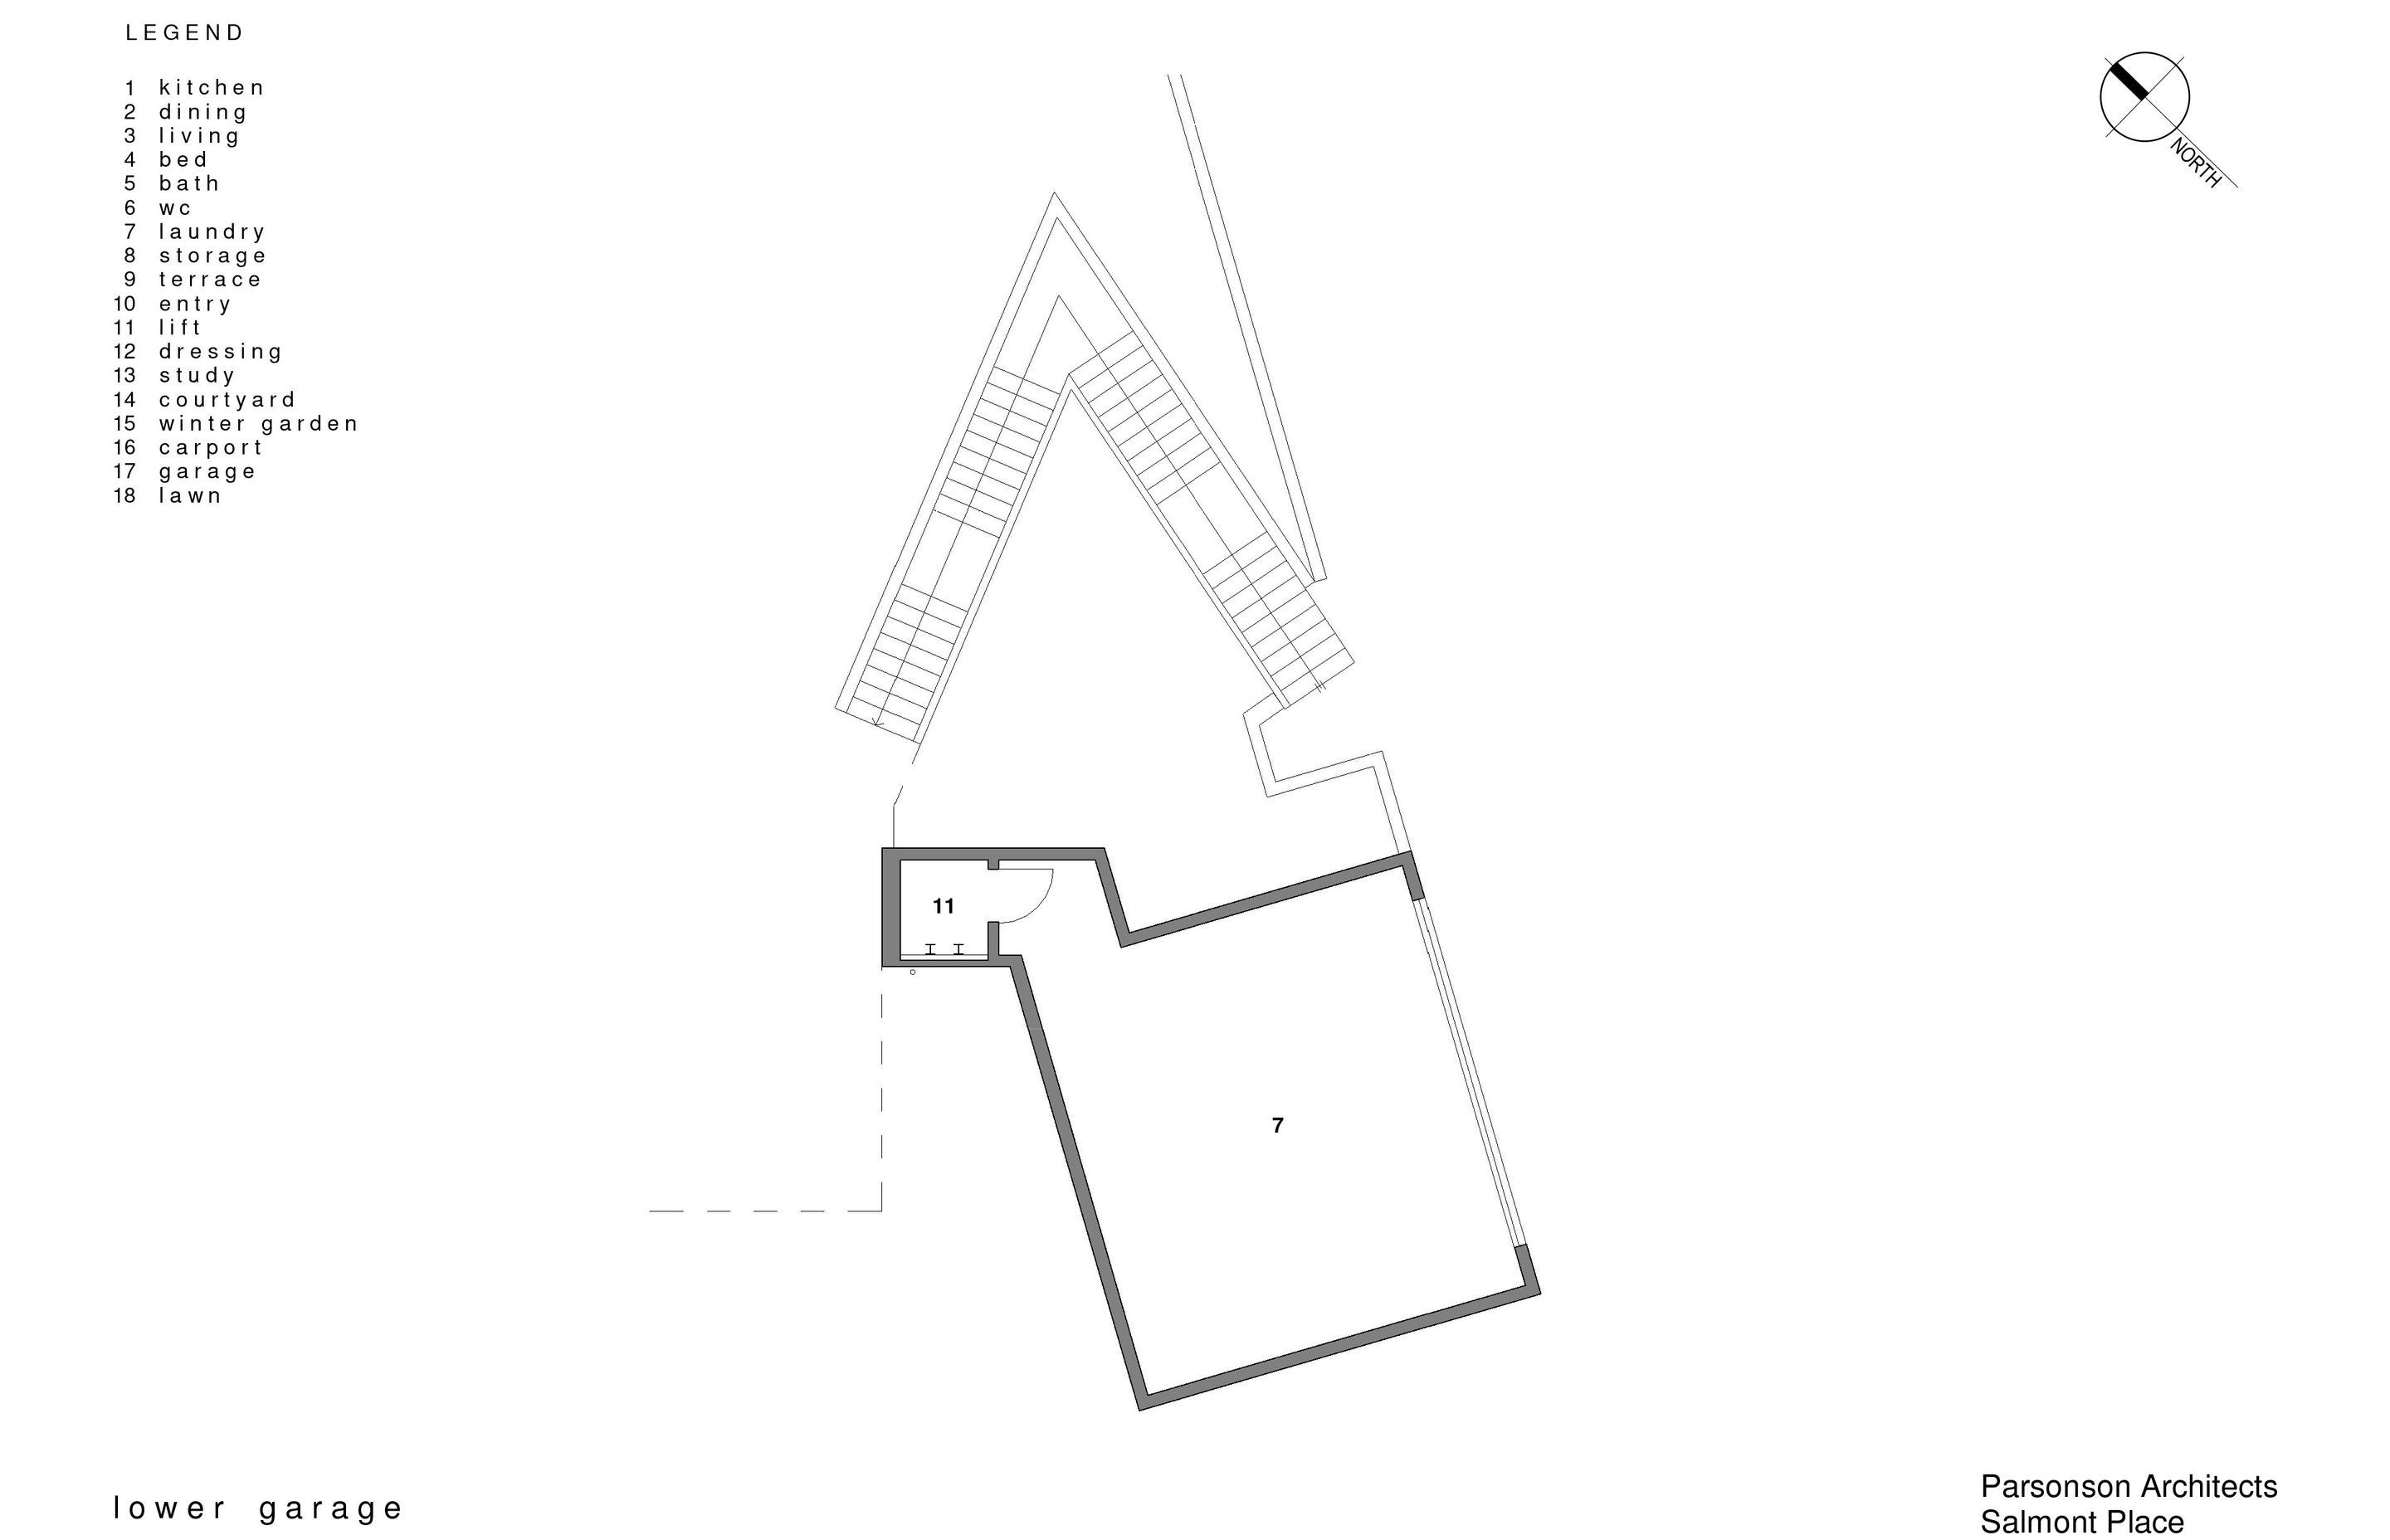 The lower garage plan for the downstairs apartment.